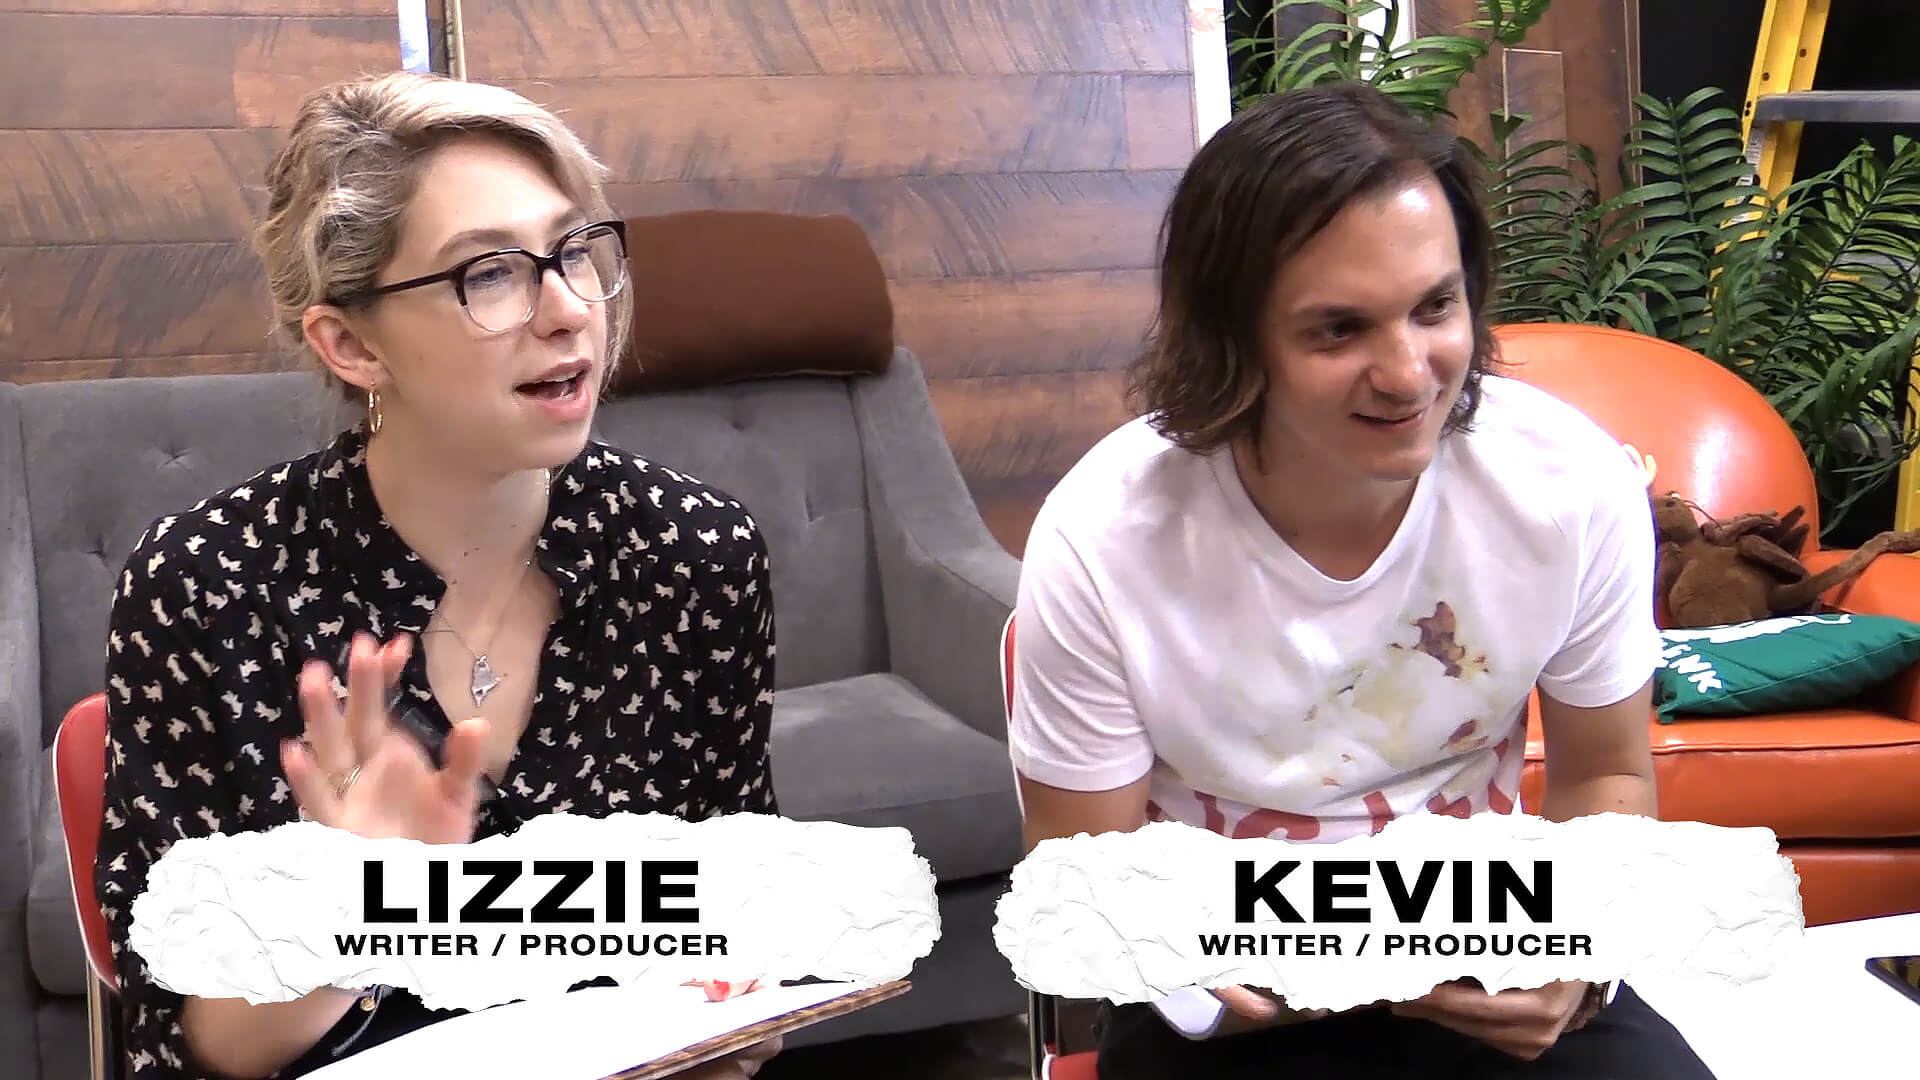 GMM writers Lizzie and Kevin introduce themselves in a segment for Good Mythical Crew directed by Todd Bishop